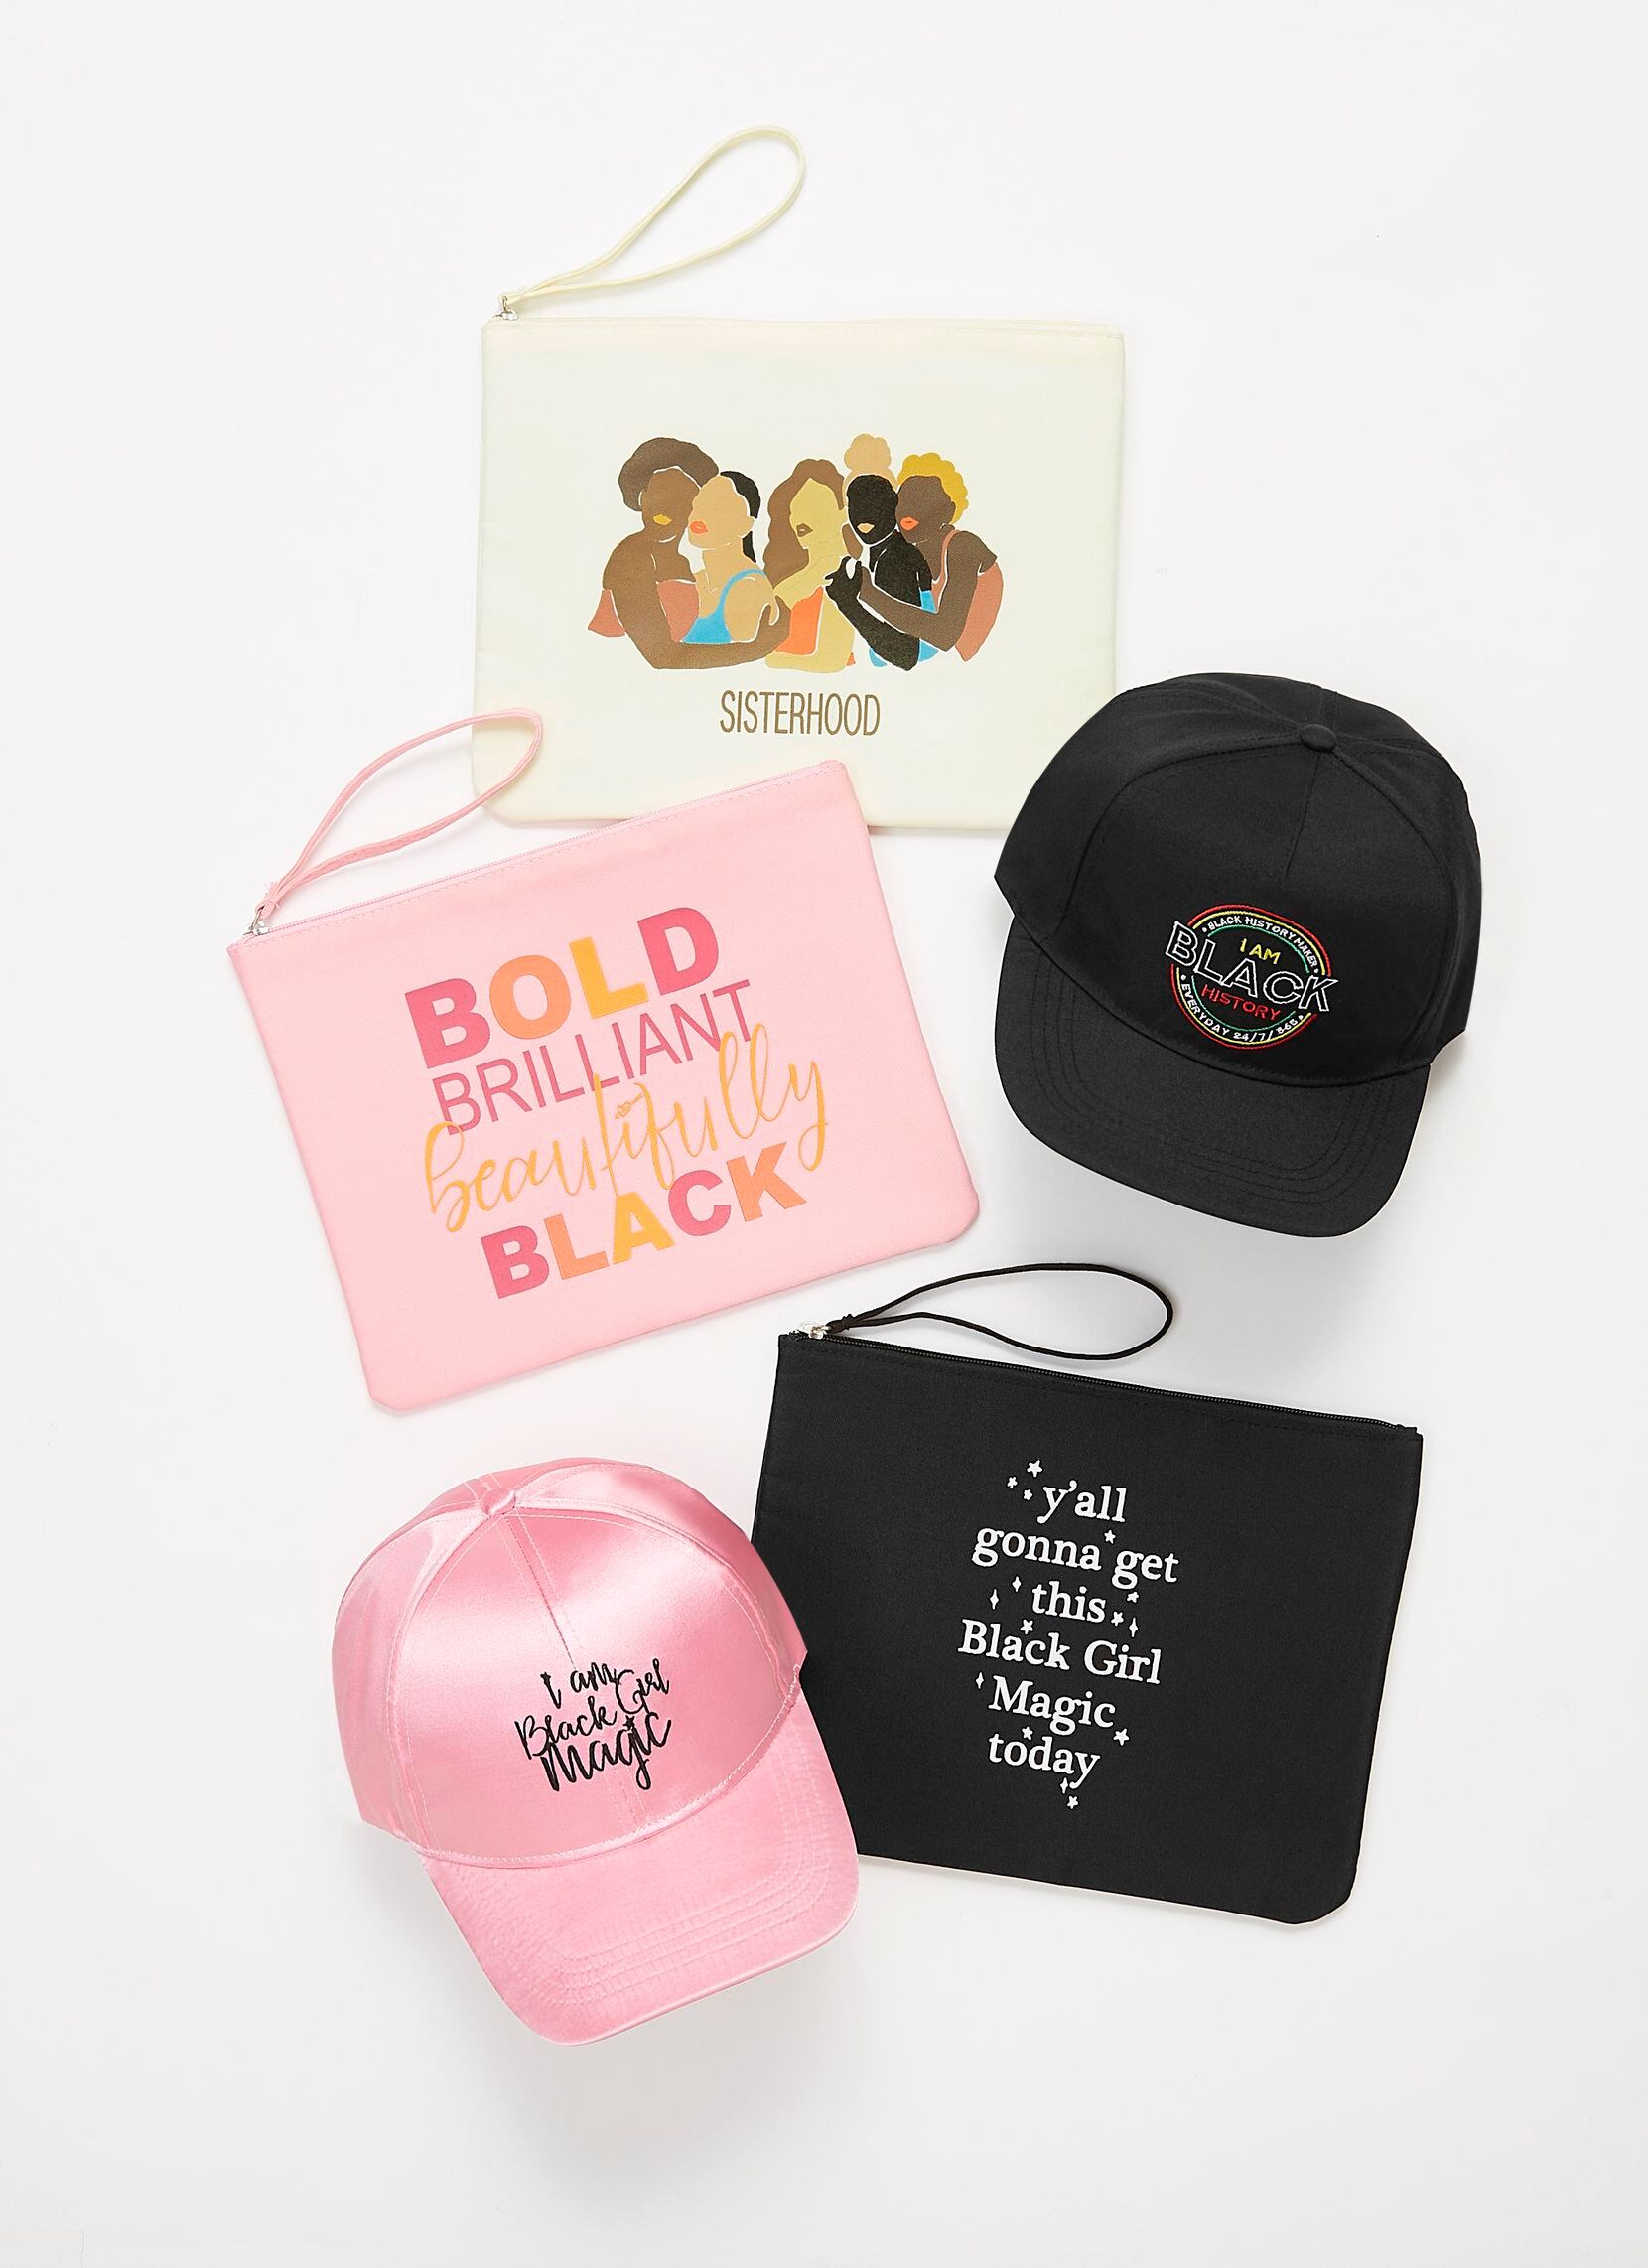 Fashion accessories for Black History Month from J.C. Penney's new Hope & Wonder private brand.  